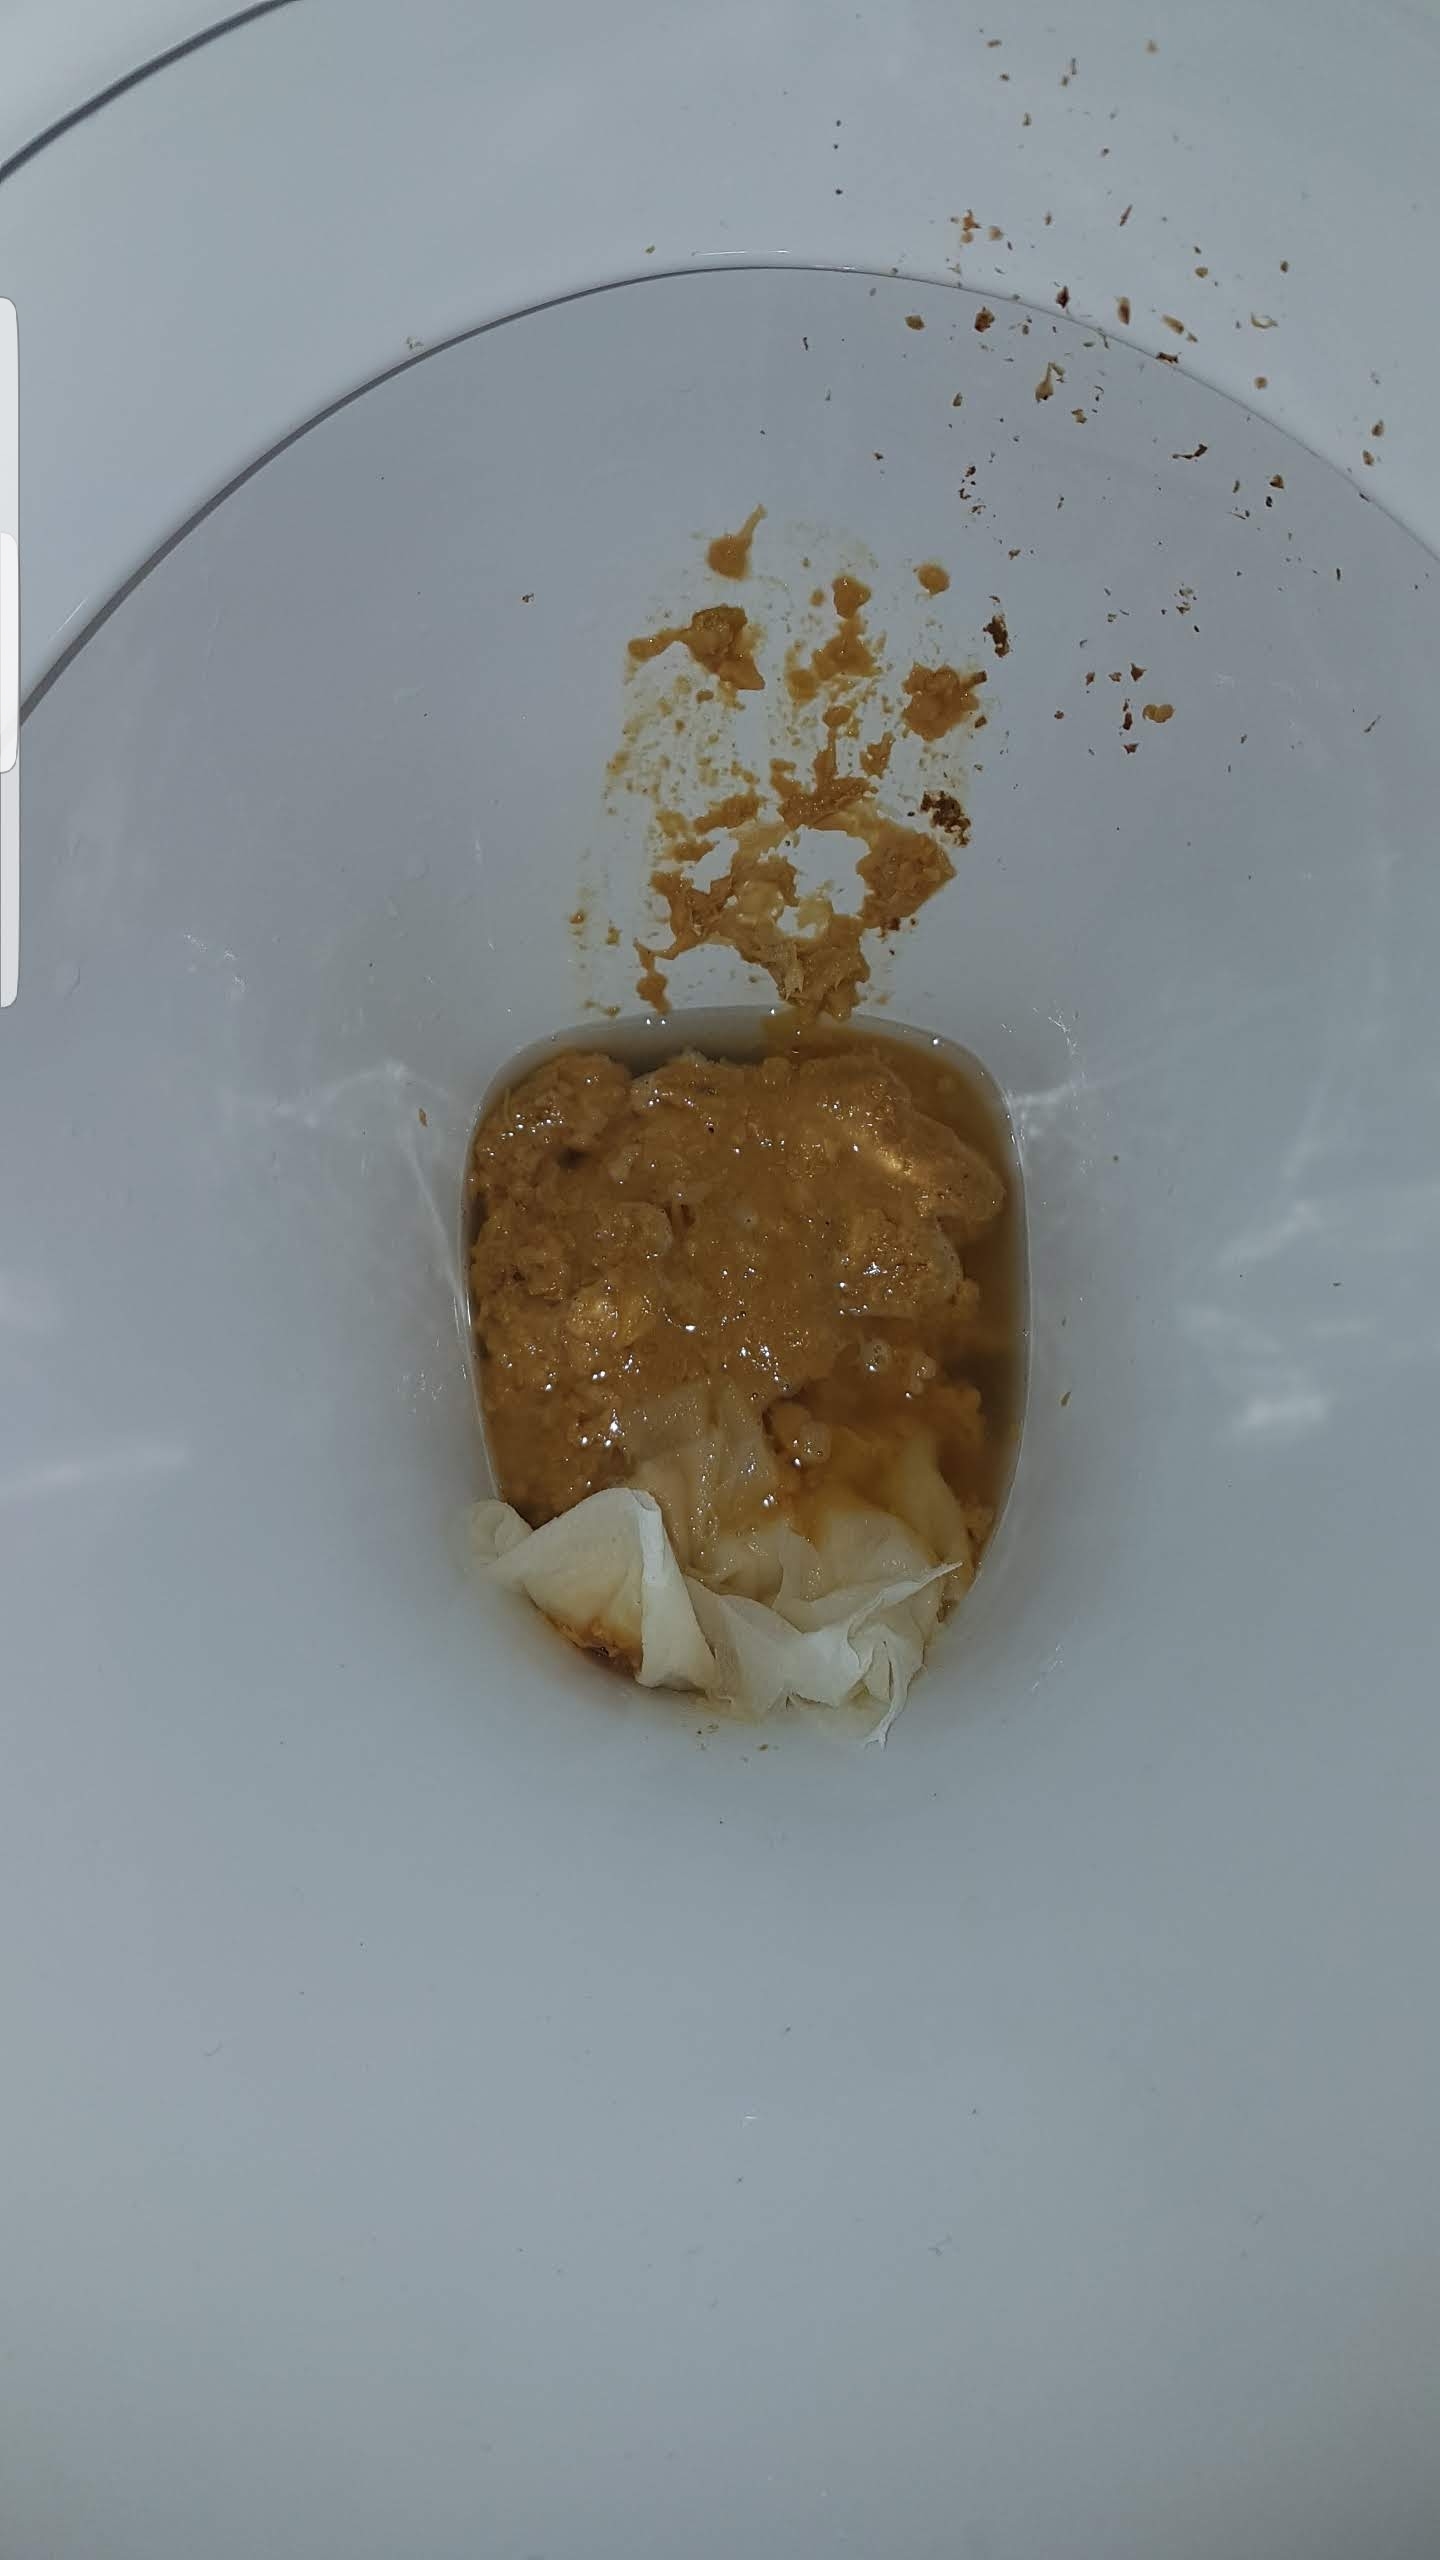 Loose gassy shit on mates loo before work